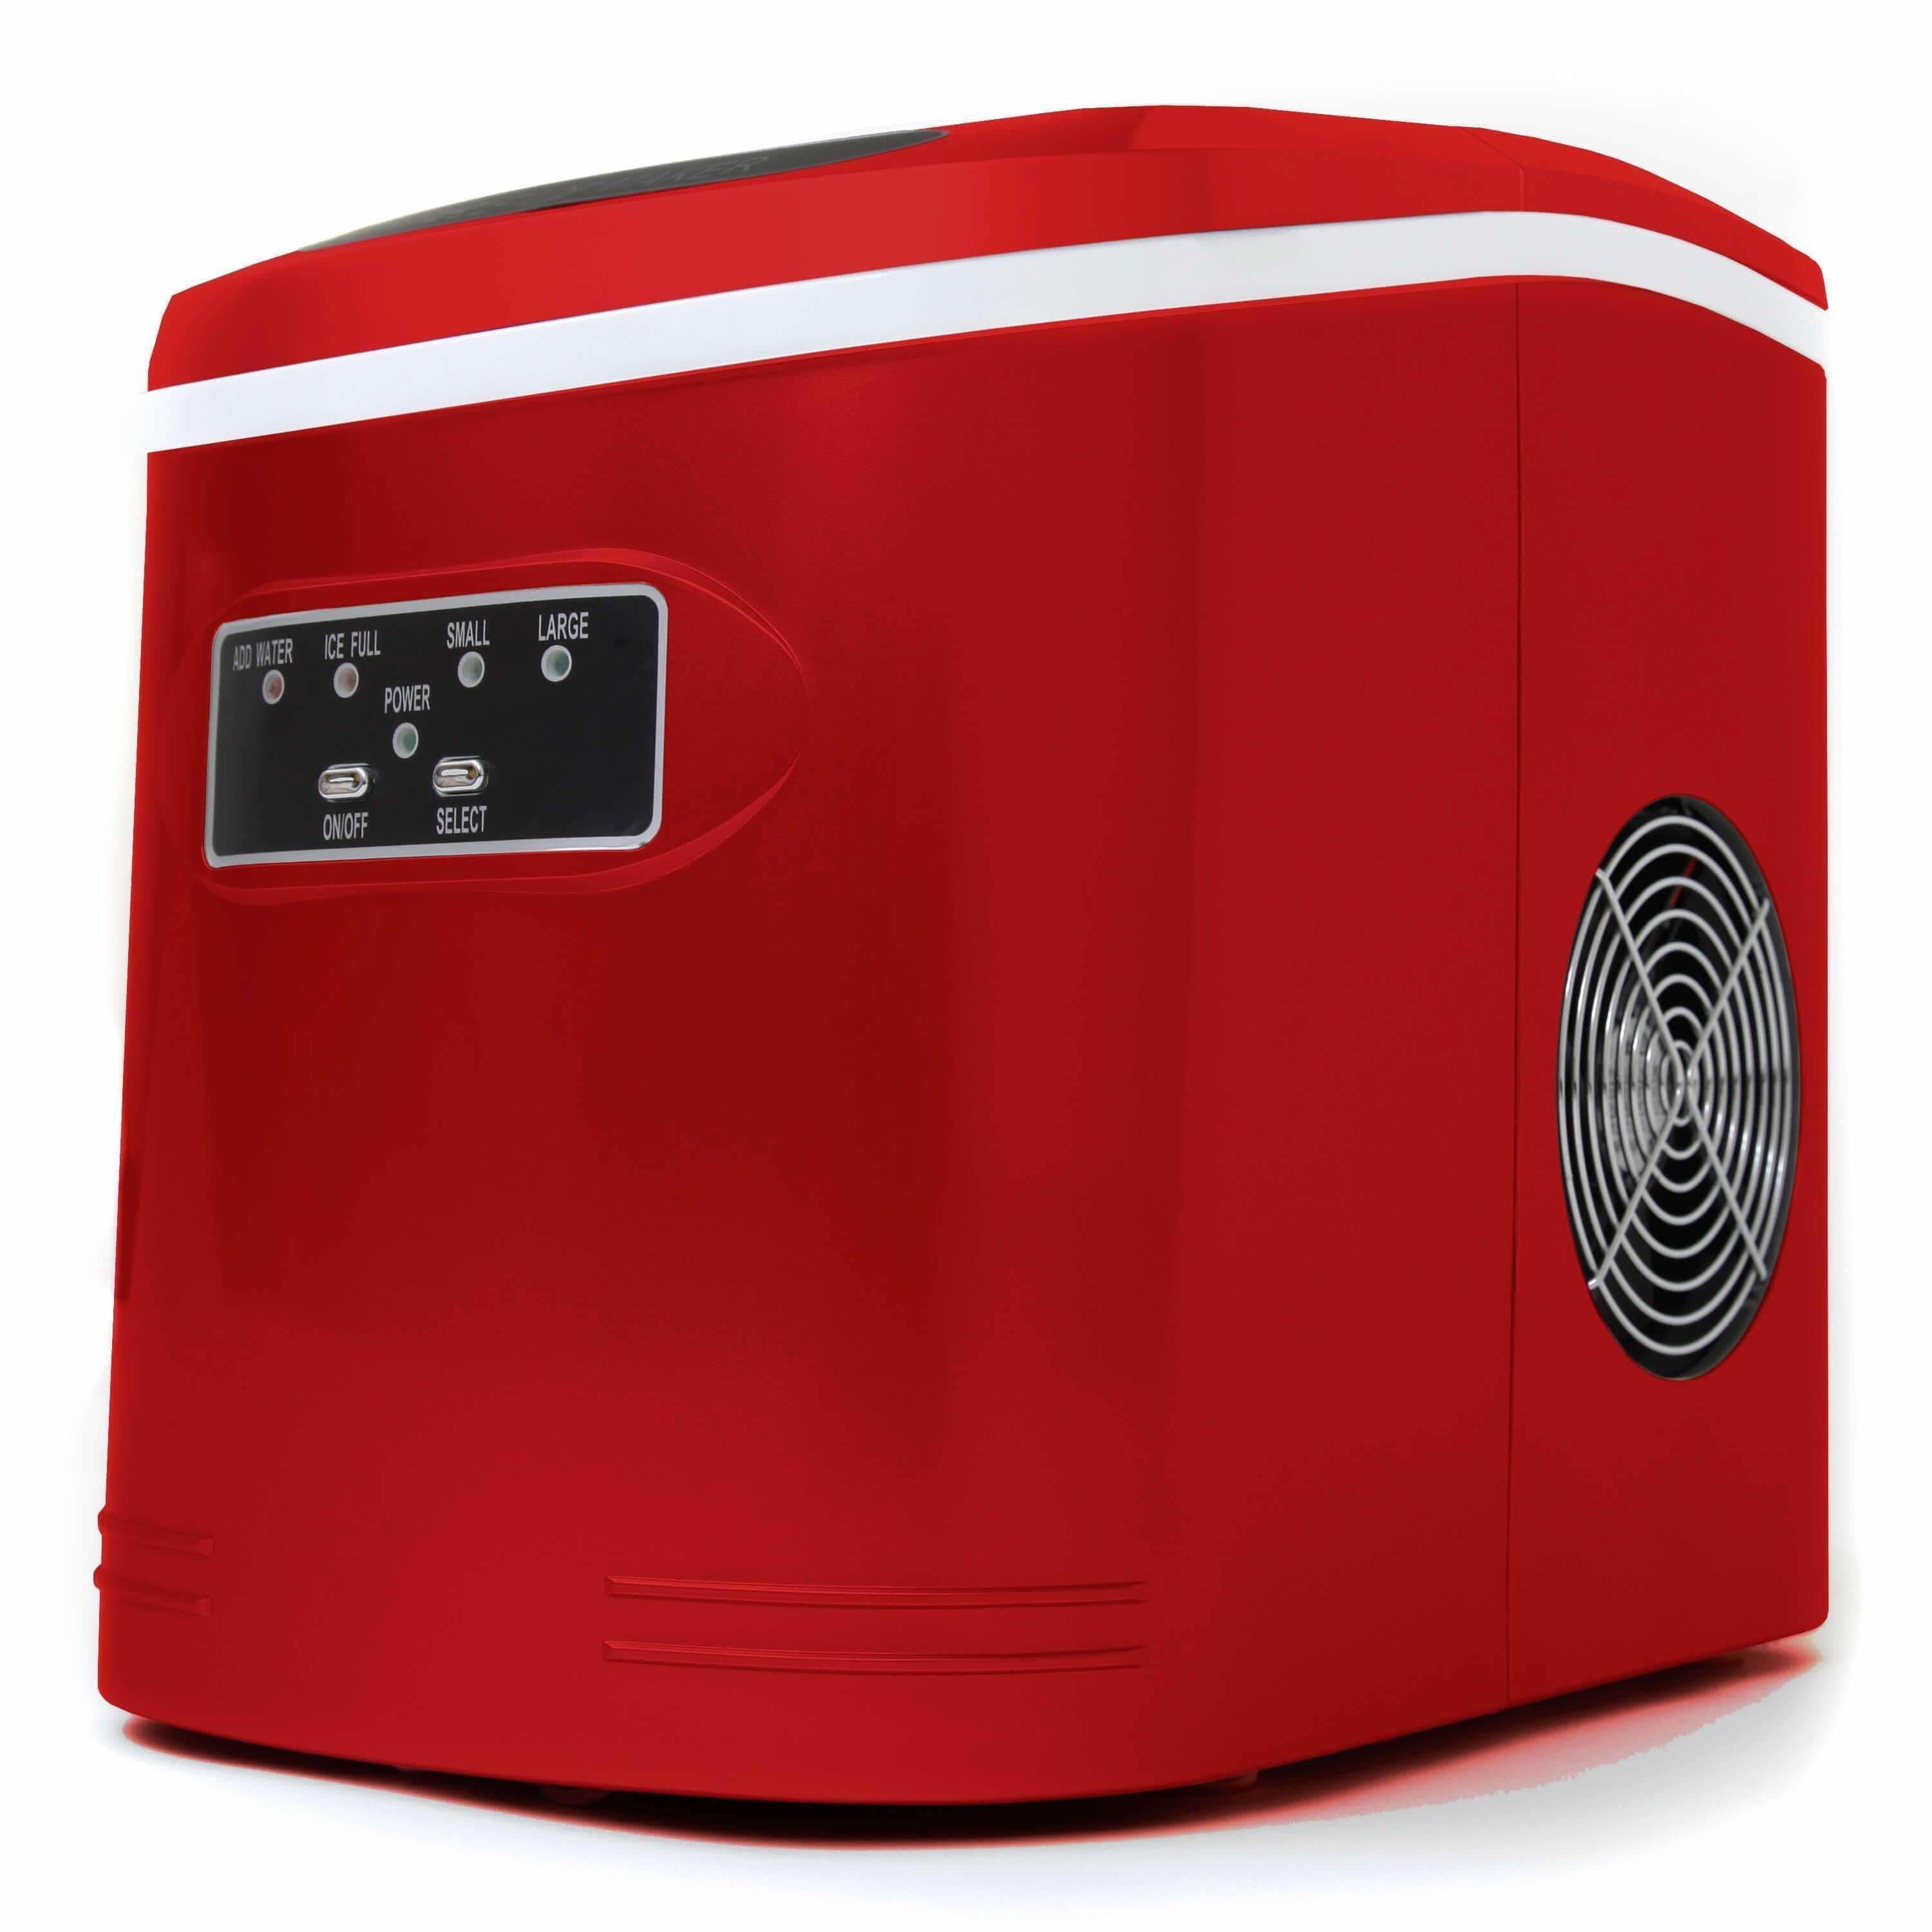 Whynter Compact Portable Ice Maker 27 lb capacity Red IMC-270MR Portable/Counter Top Ice Makers IMC-270MR Luxury Appliances Direct